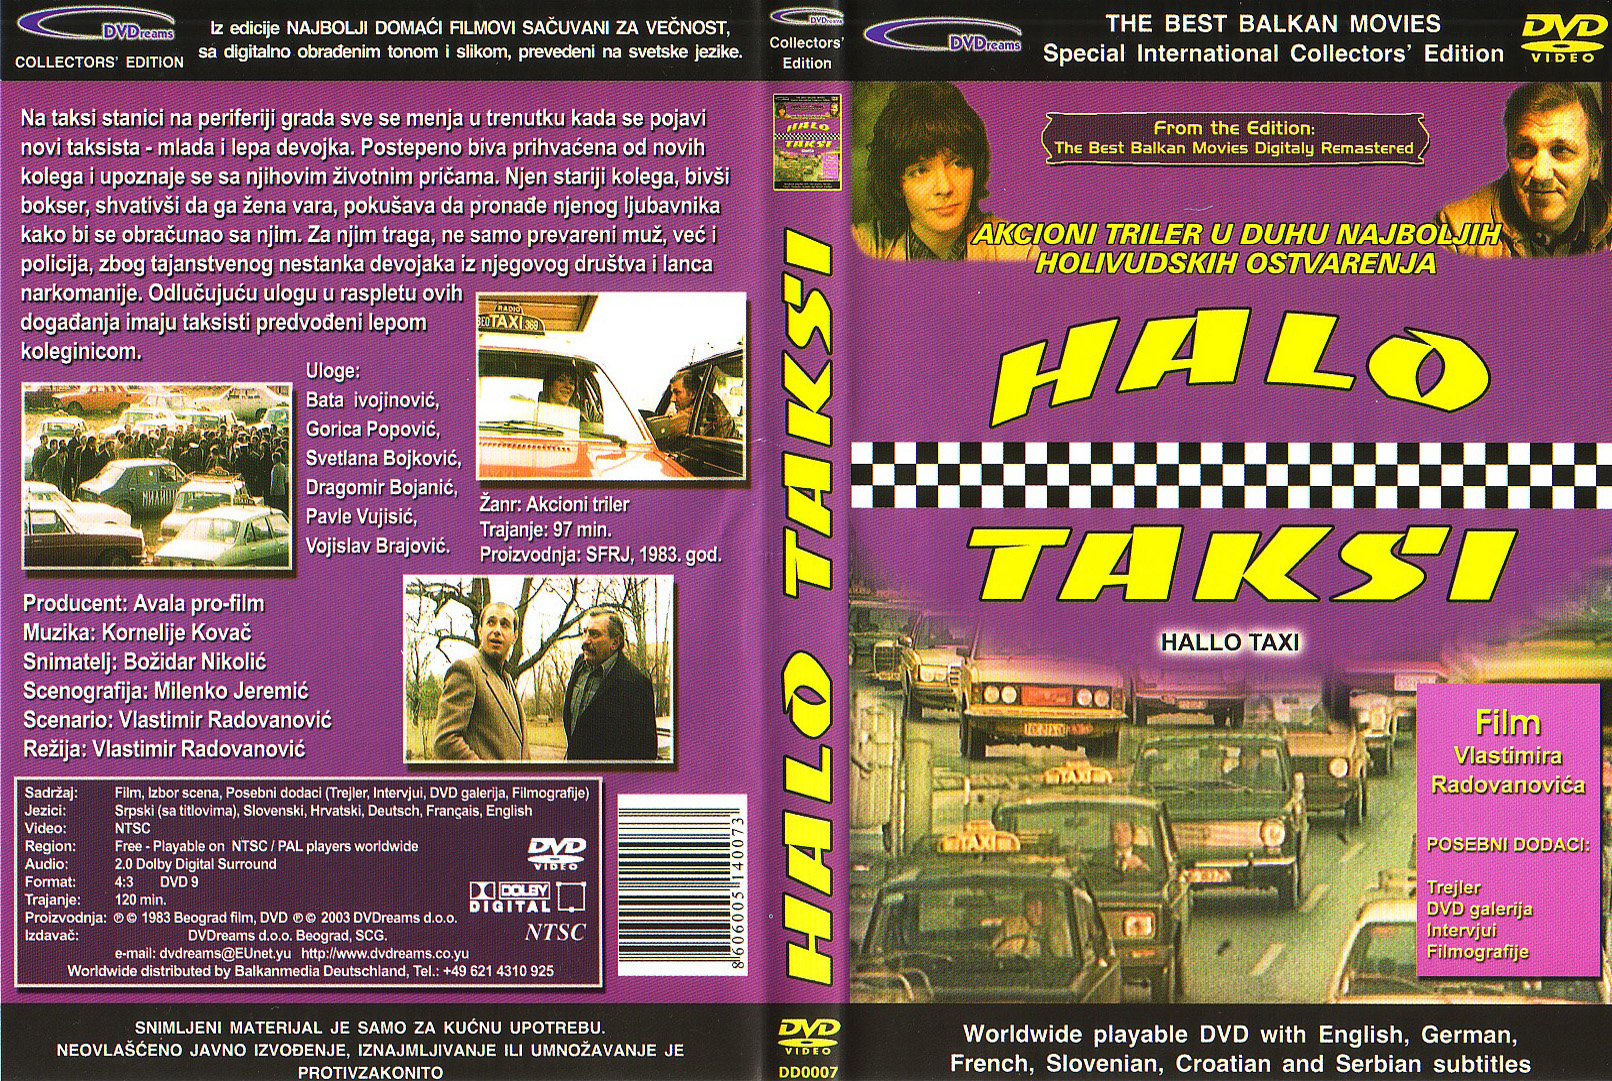 Click to view full size image -  DVD Cover - H - halo_taxi_dvd - halo_taxi_dvd.jpg